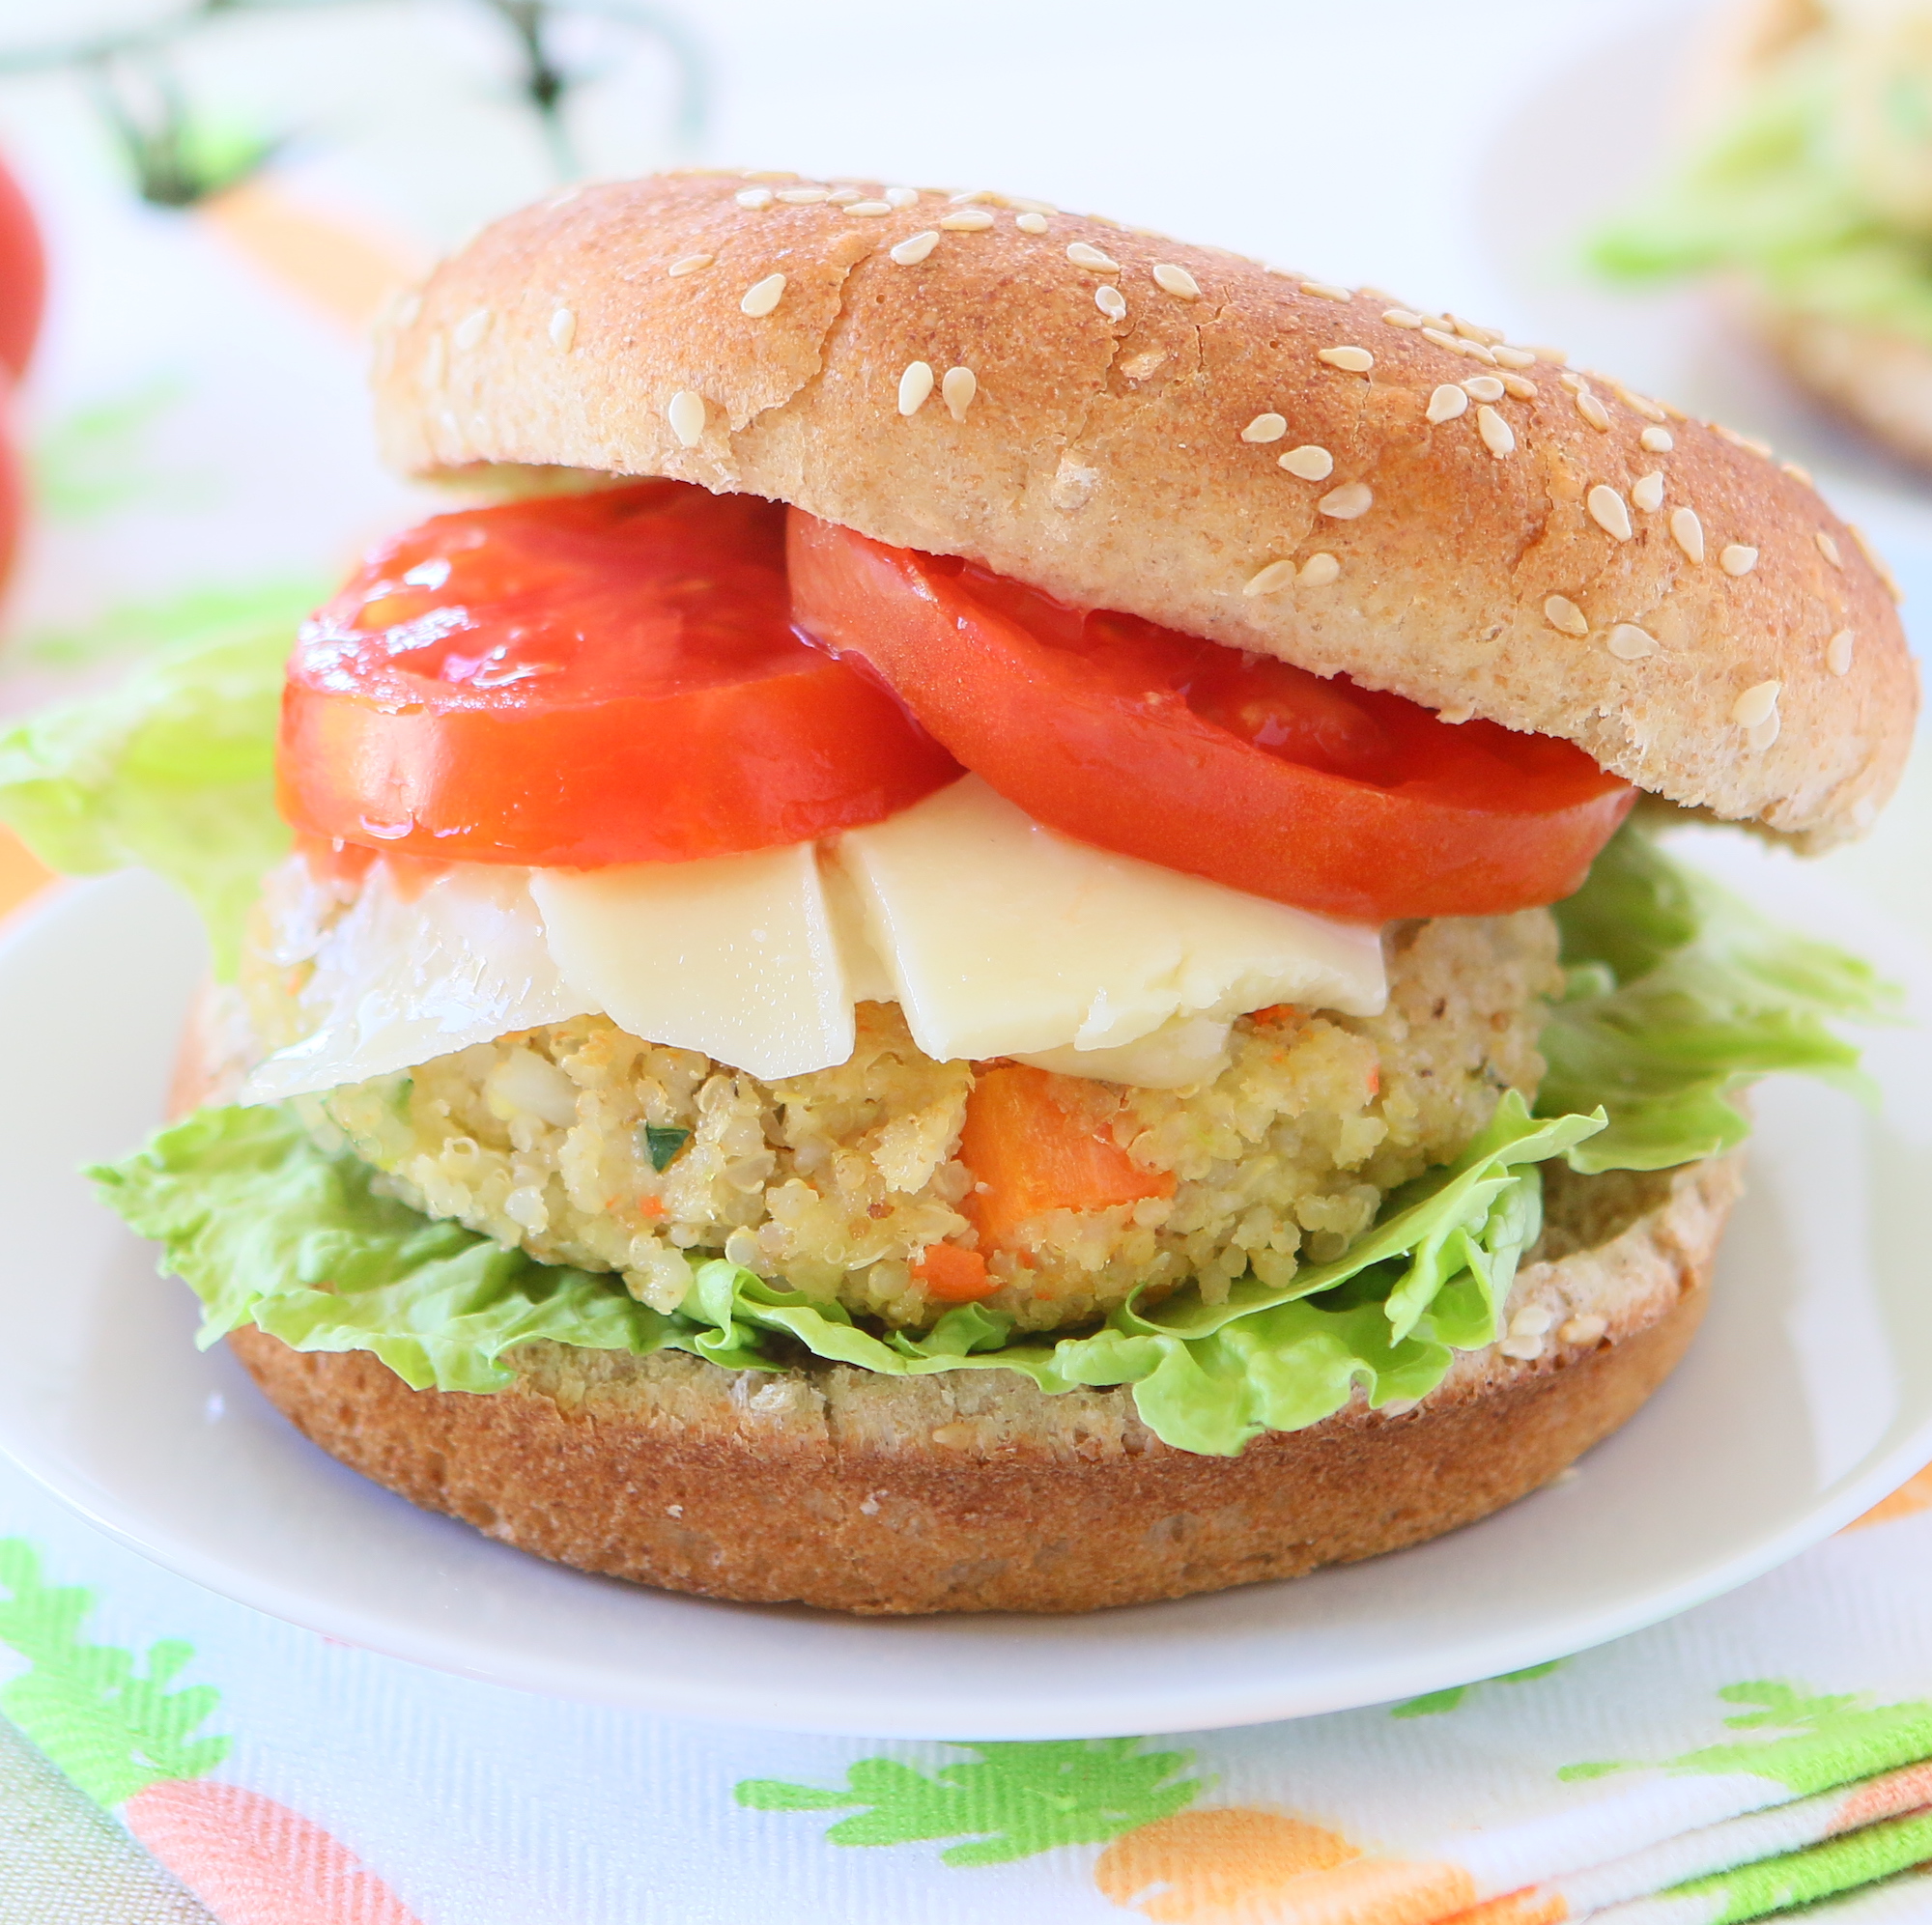 Meatless Quinoa and Vegetable Burgers. Full of flavors +9M